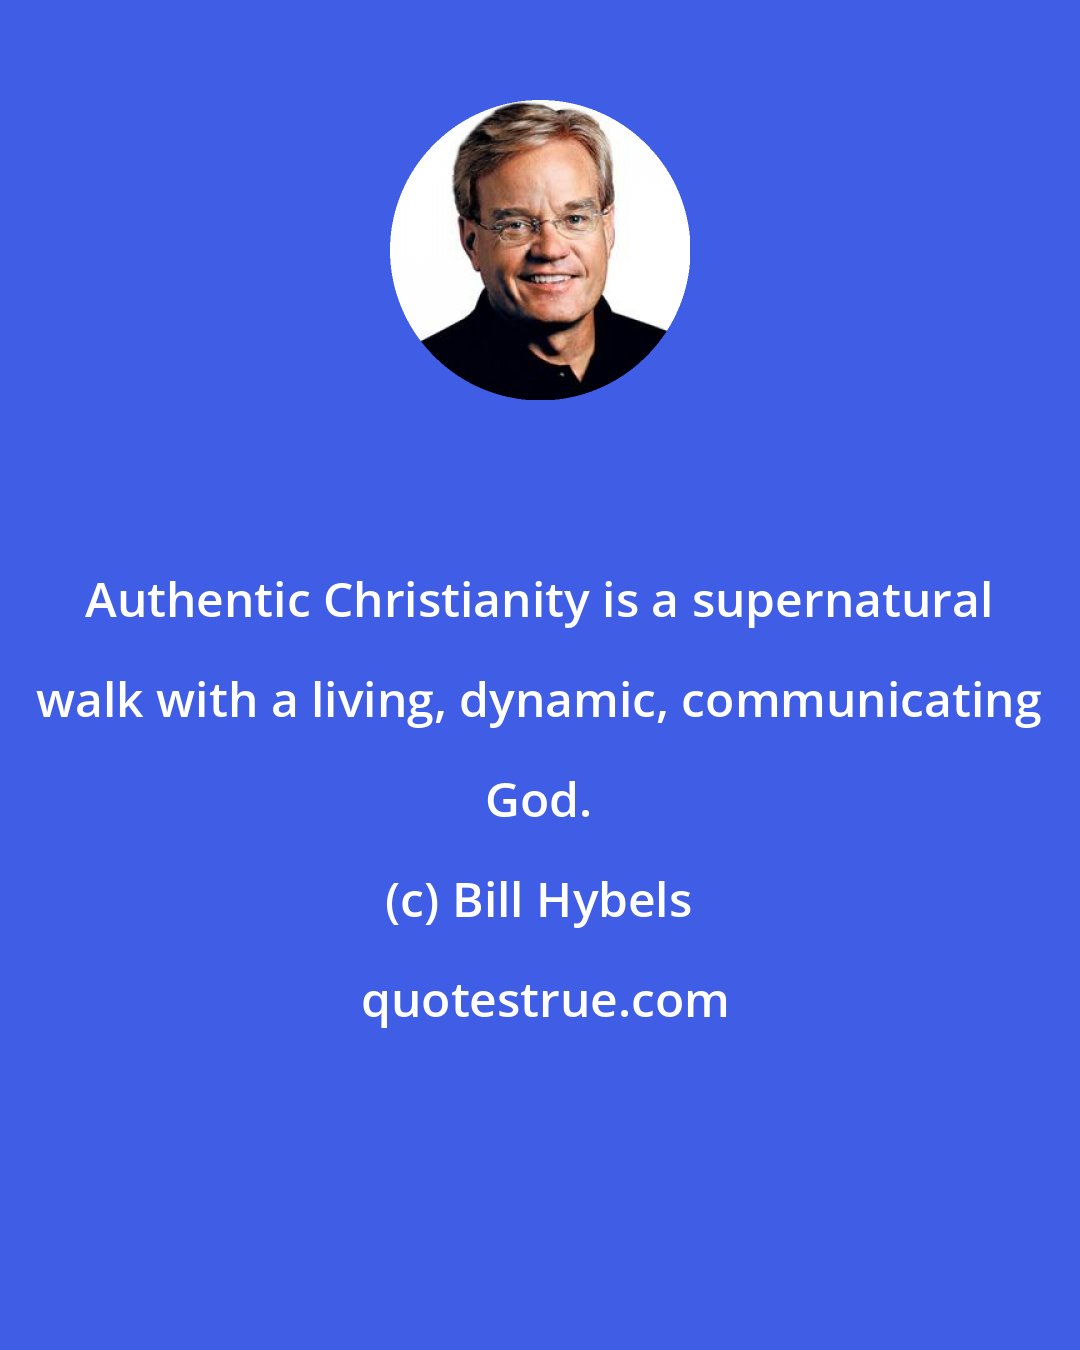 Bill Hybels: Authentic Christianity is a supernatural walk with a living, dynamic, communicating God.